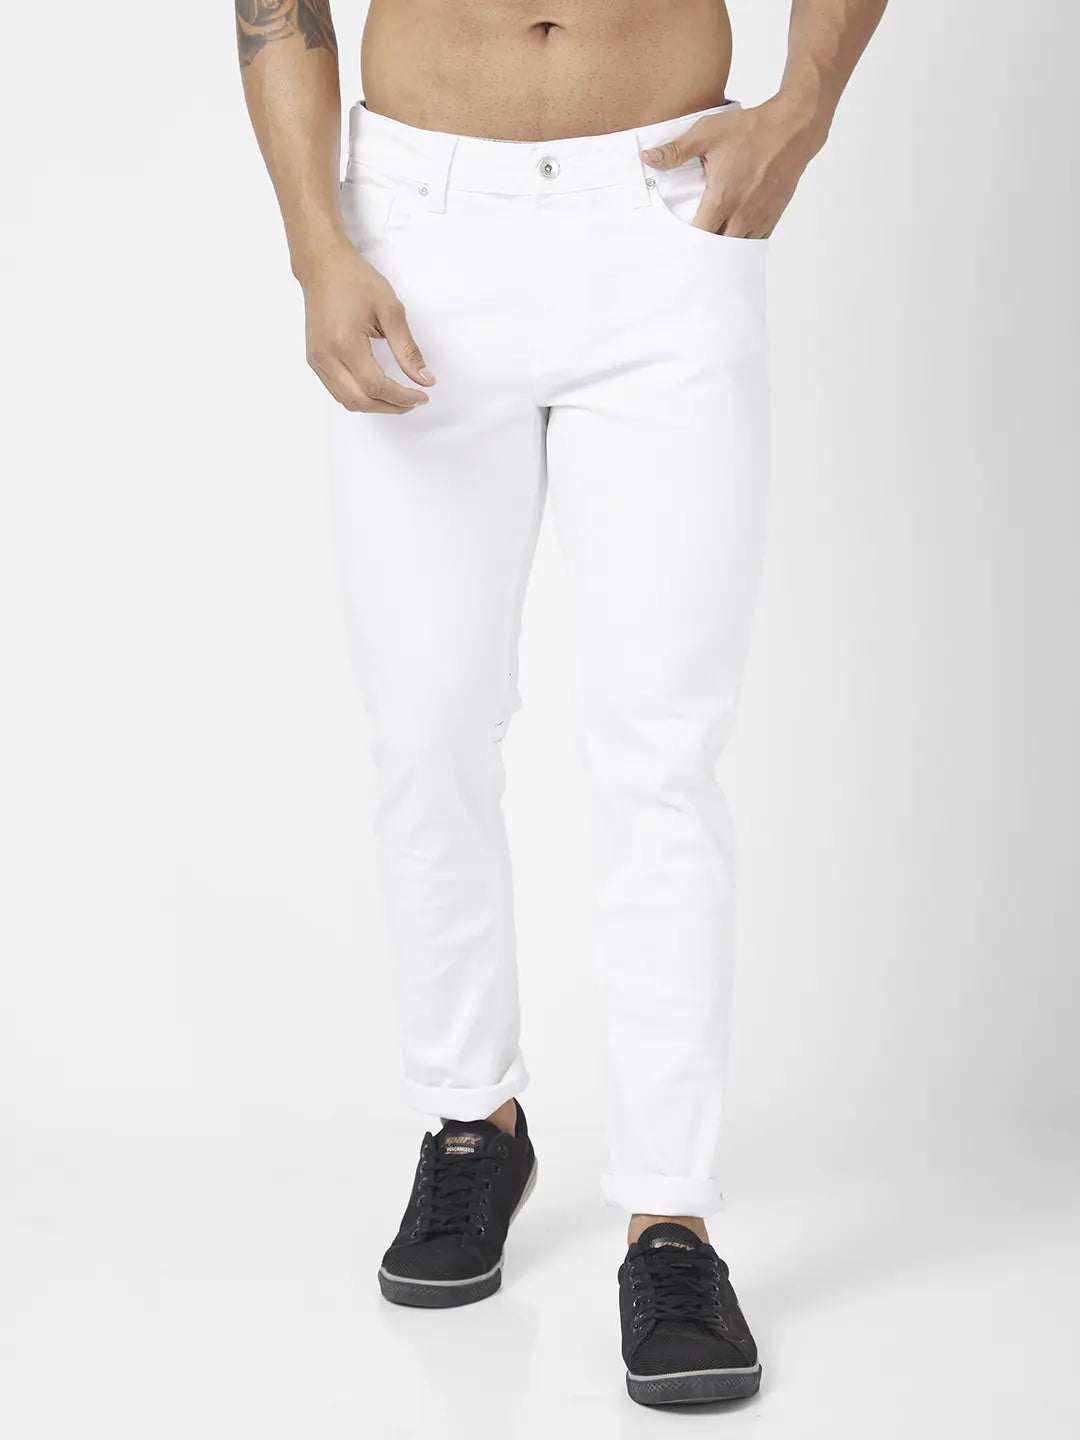 Spykar Men White Cotton Stretch Slim Fit Narrow Length Clean Look Low Rise Jeans (Skinny)